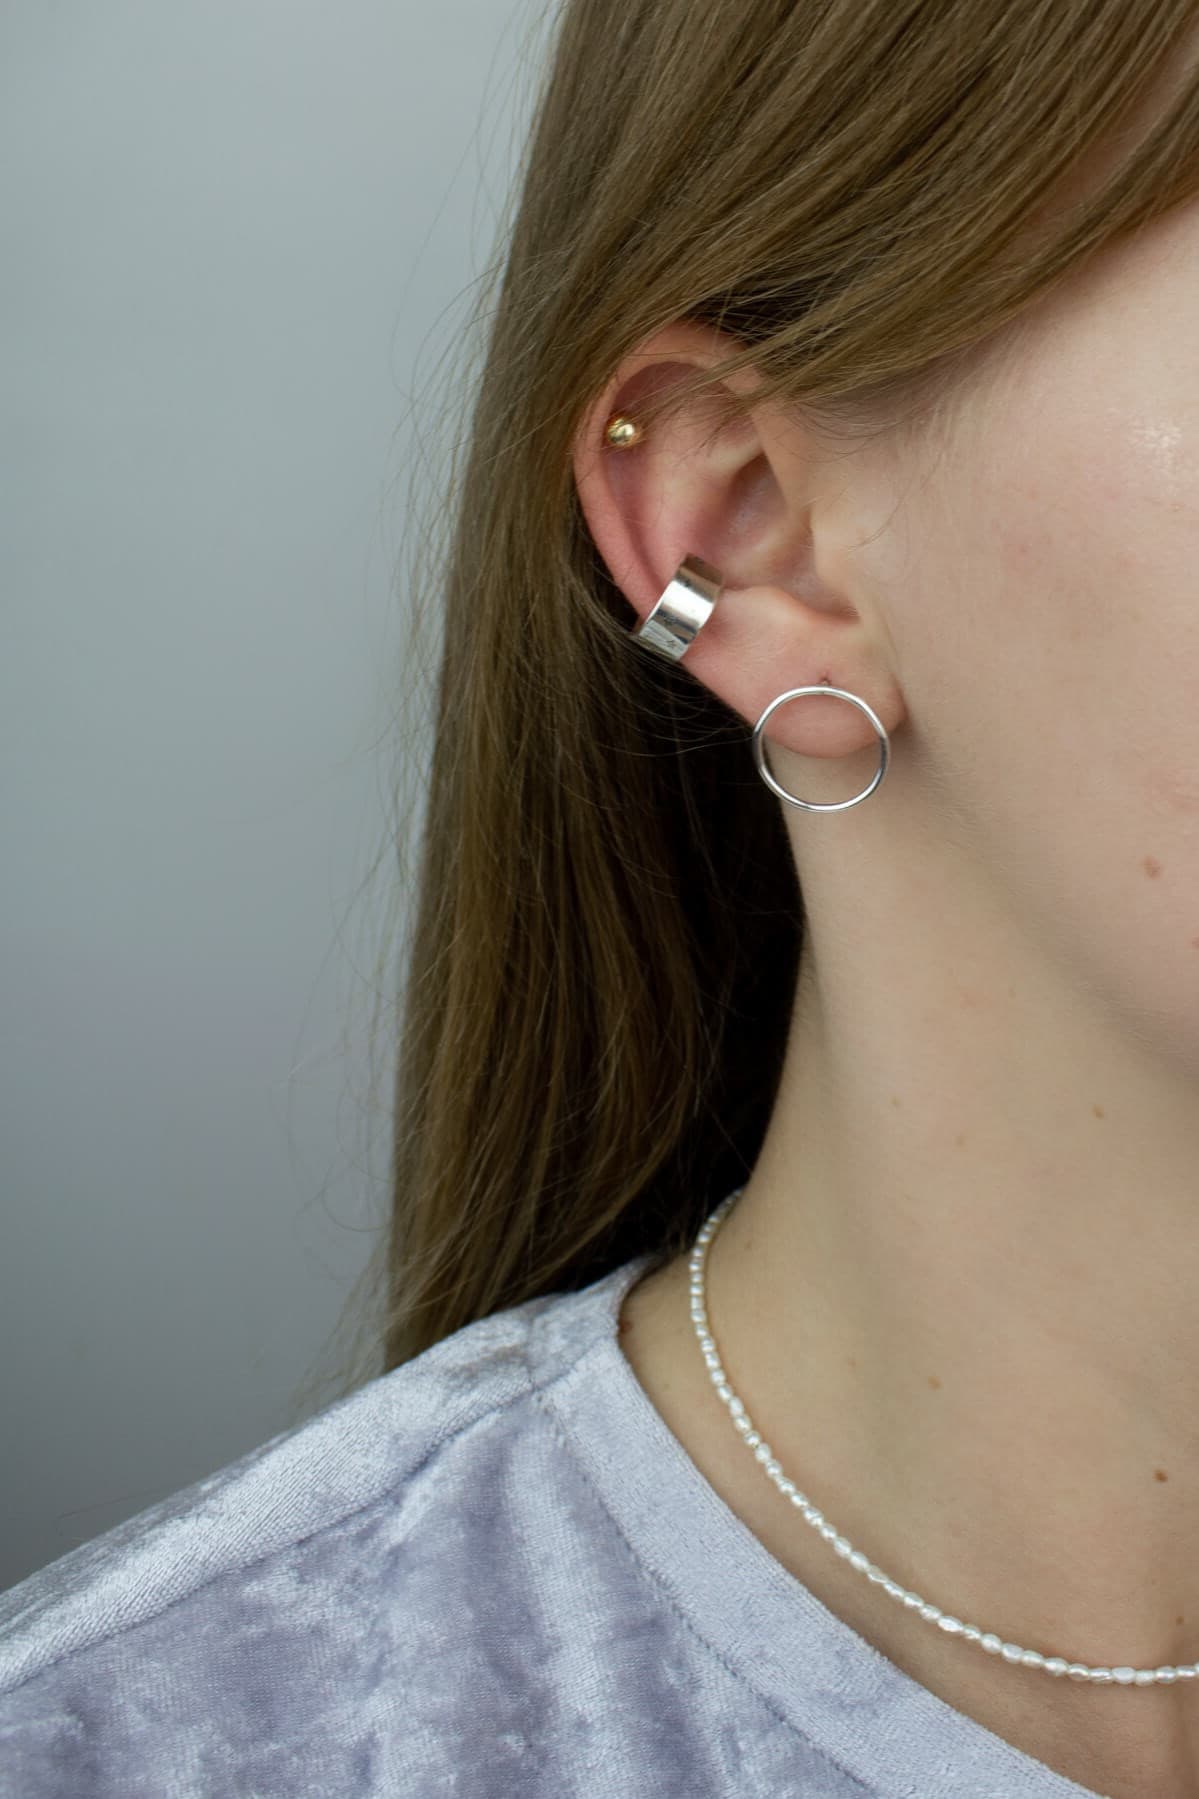 Designer jewelry, silver circle earrings and silver ear cuff on model